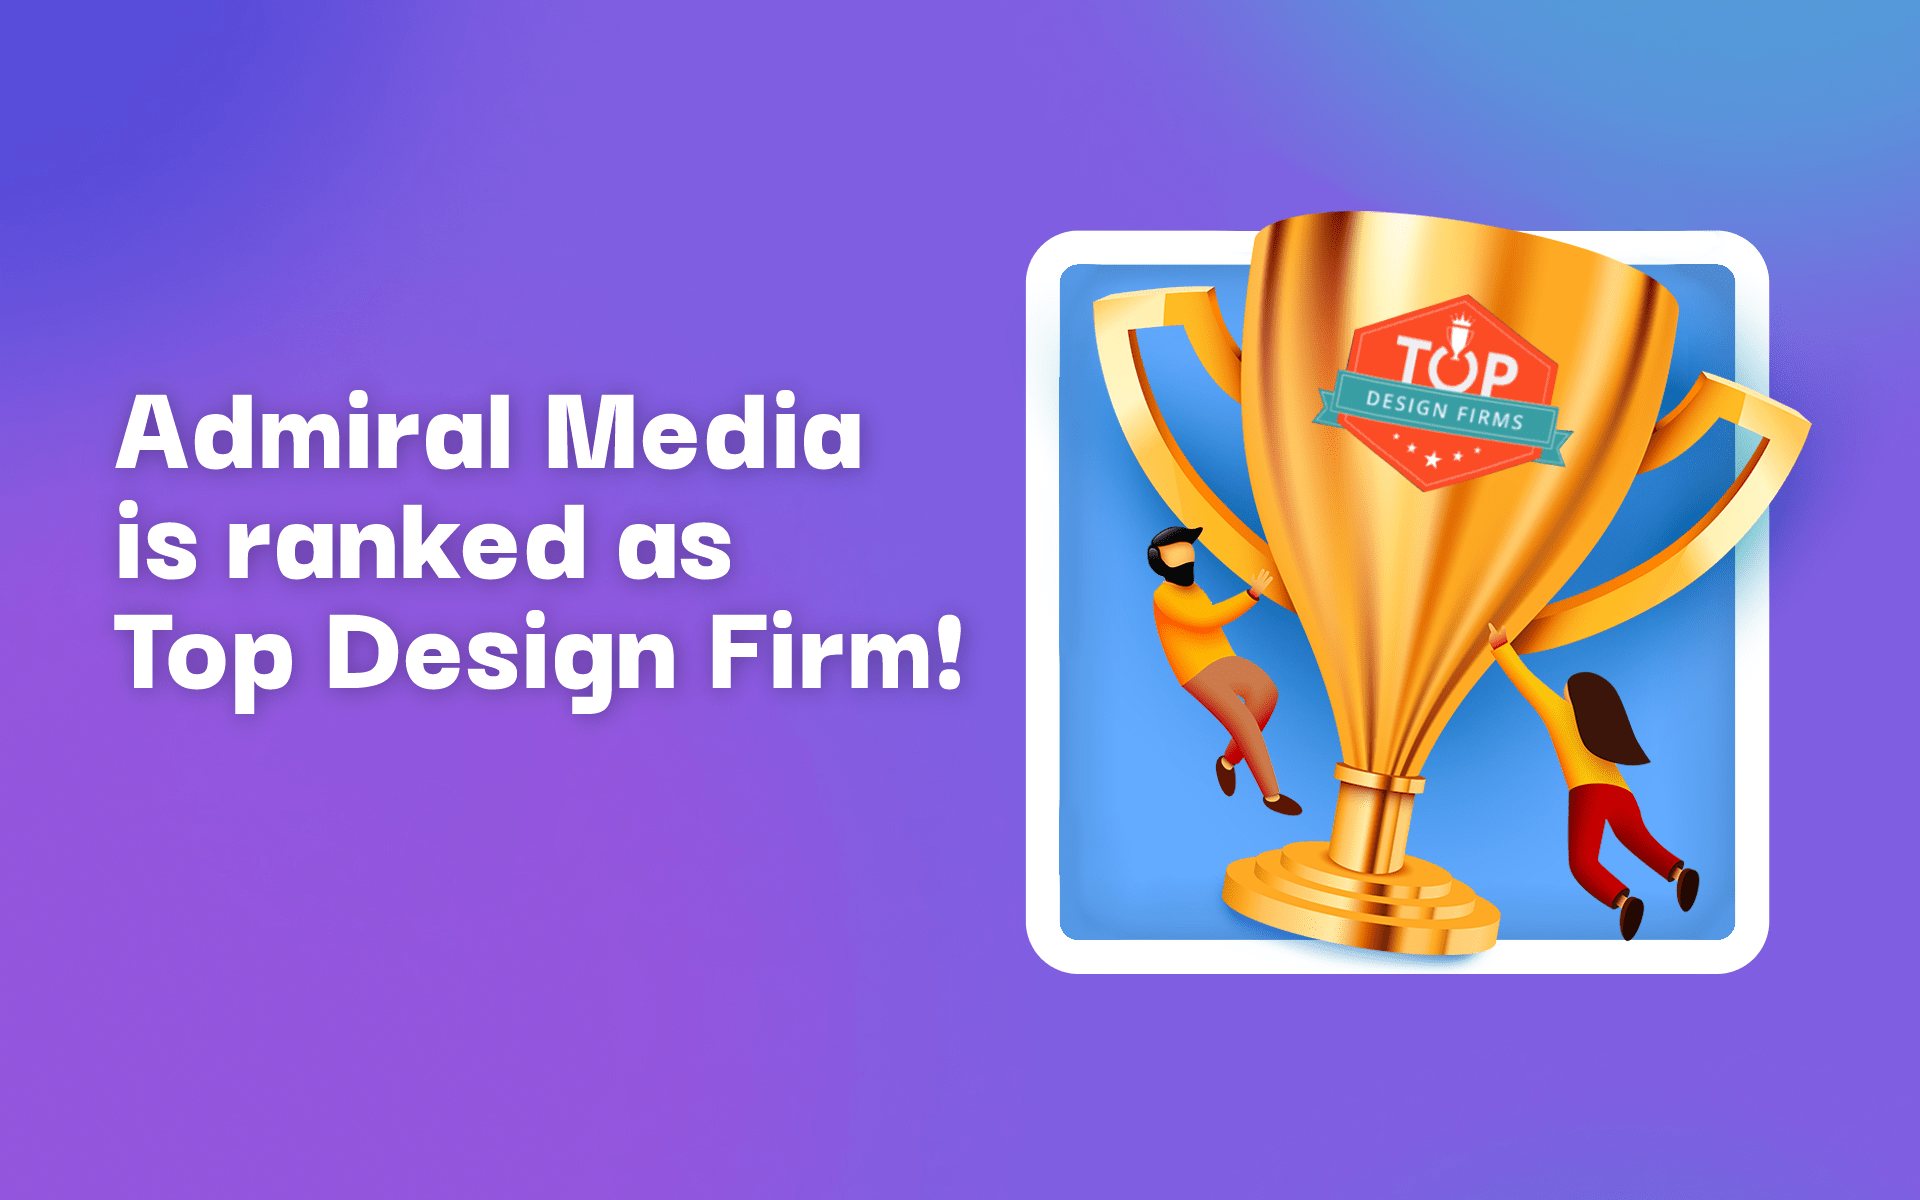 Admiral Media is ranked as Top Design Firm